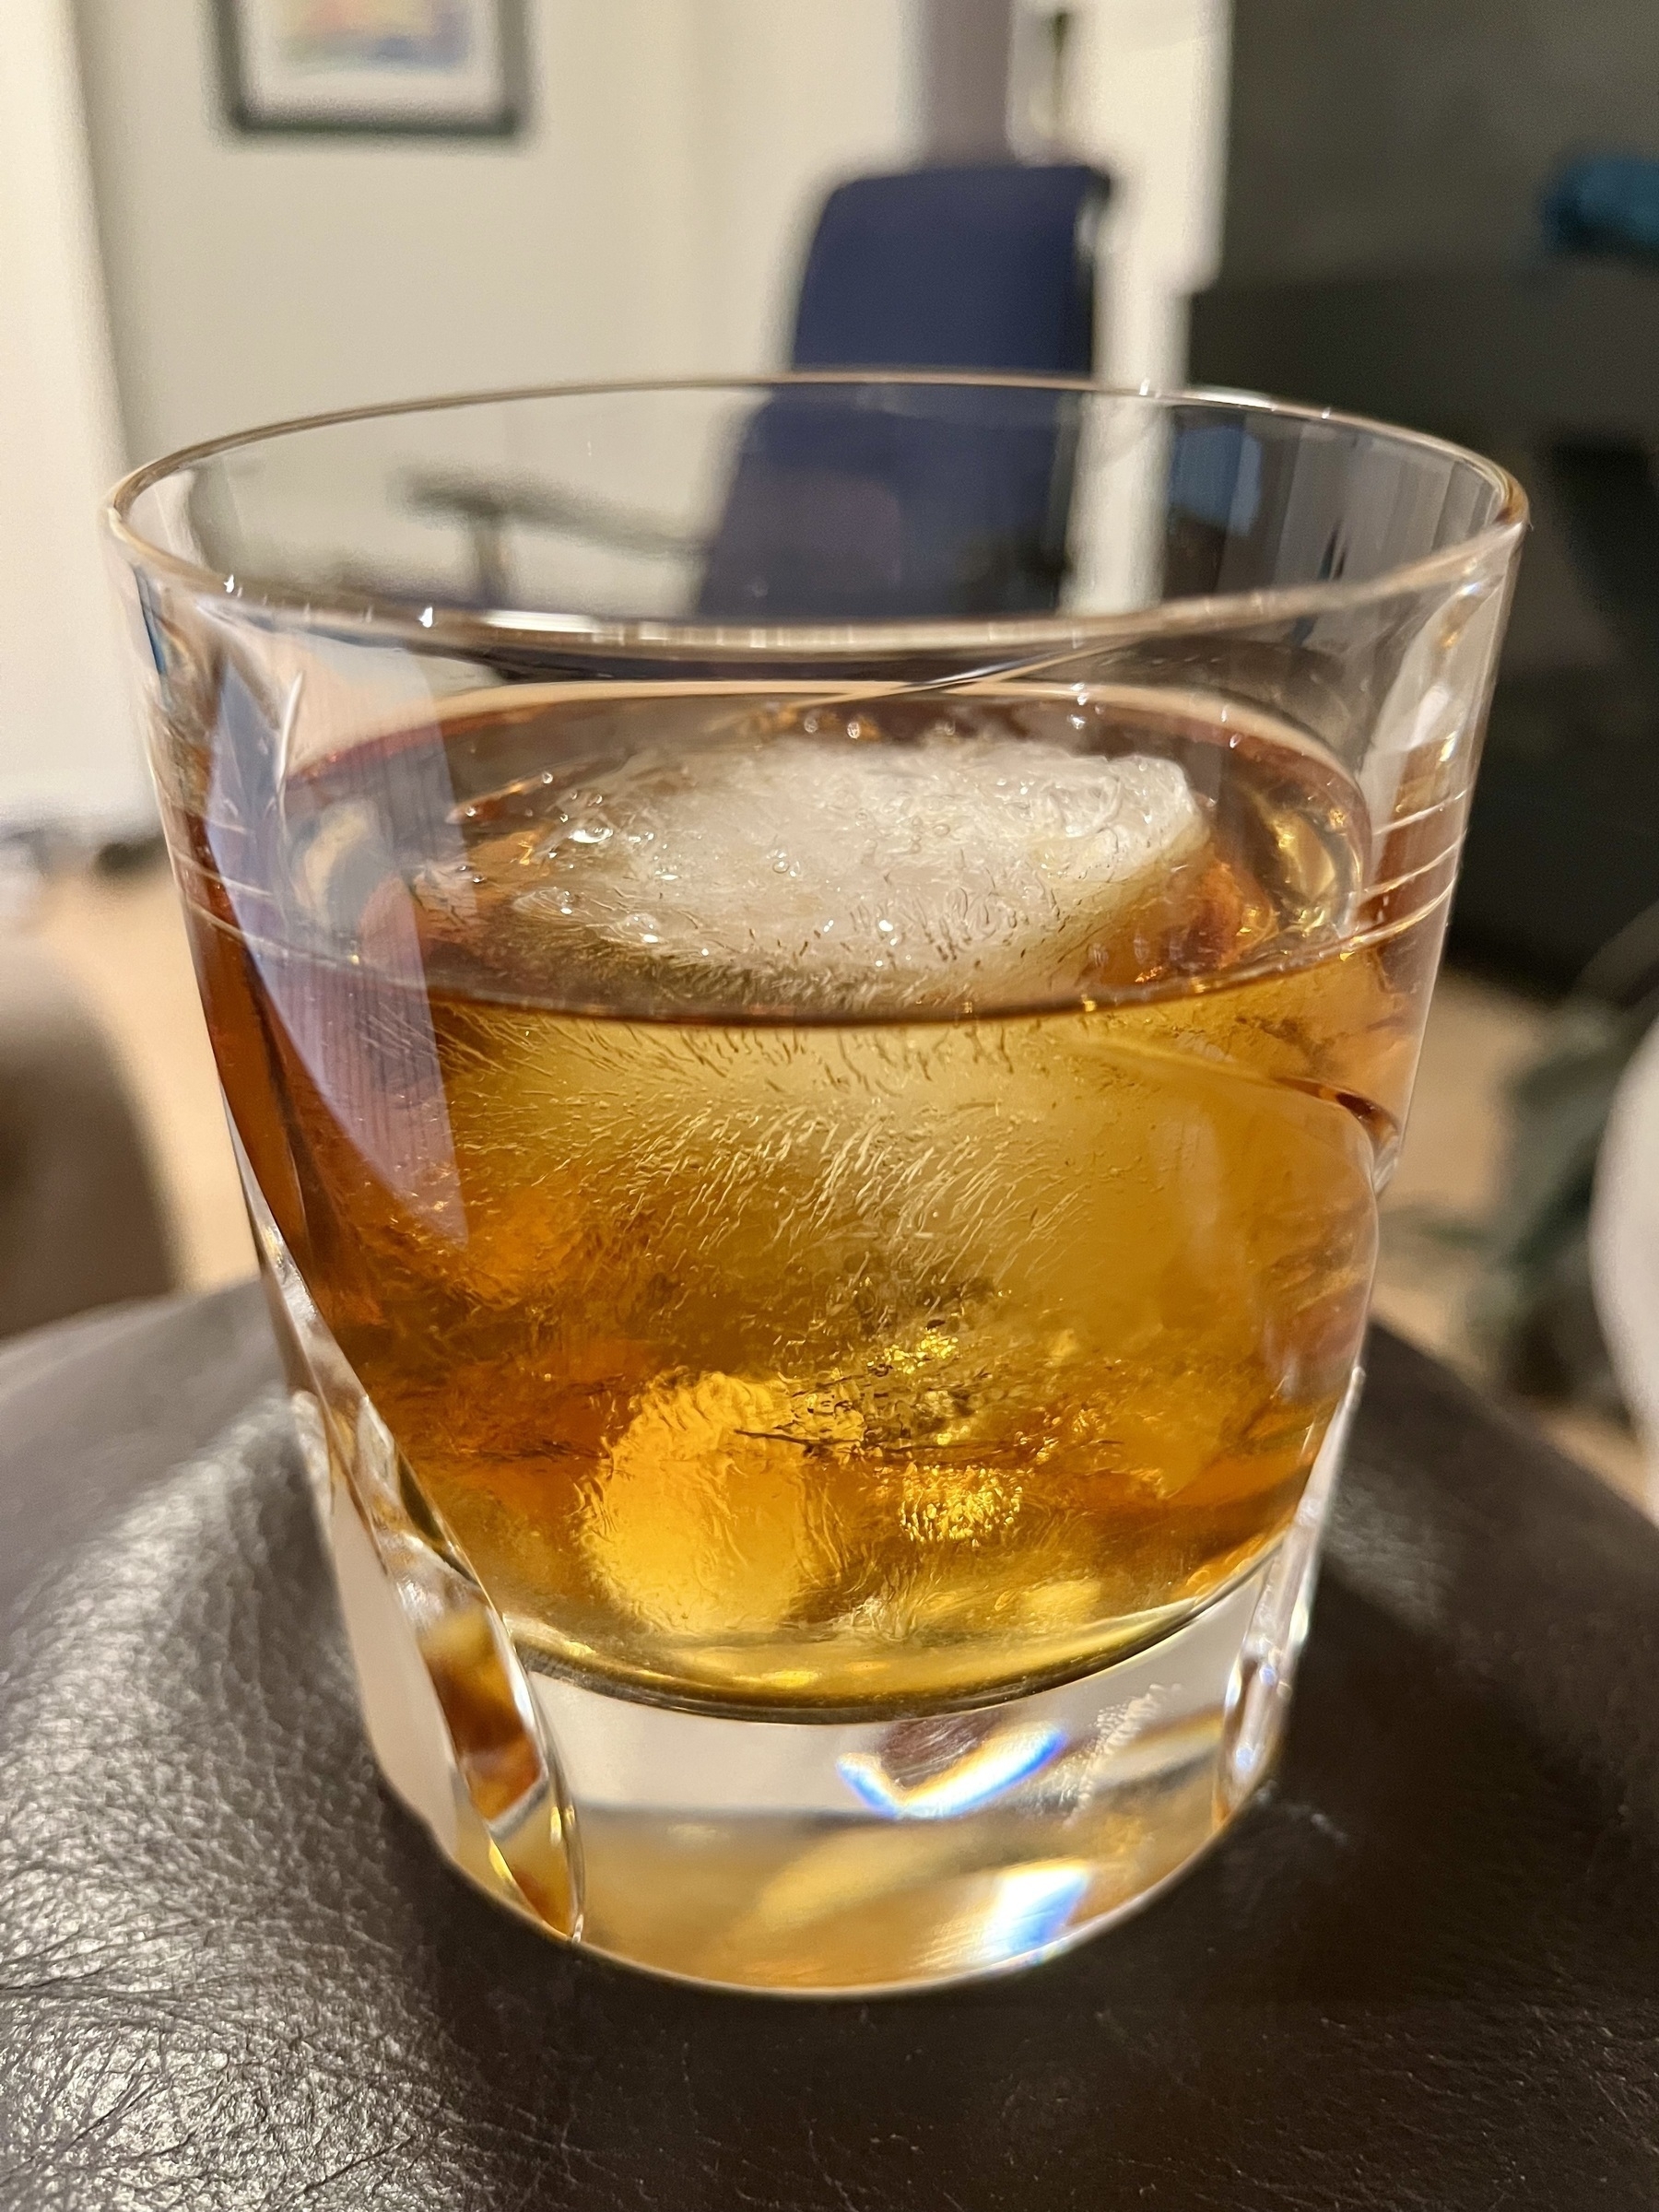 A whiskey glass holding amber liquid and a large ice cube, resting on a dark surface with a blurred indoor background.